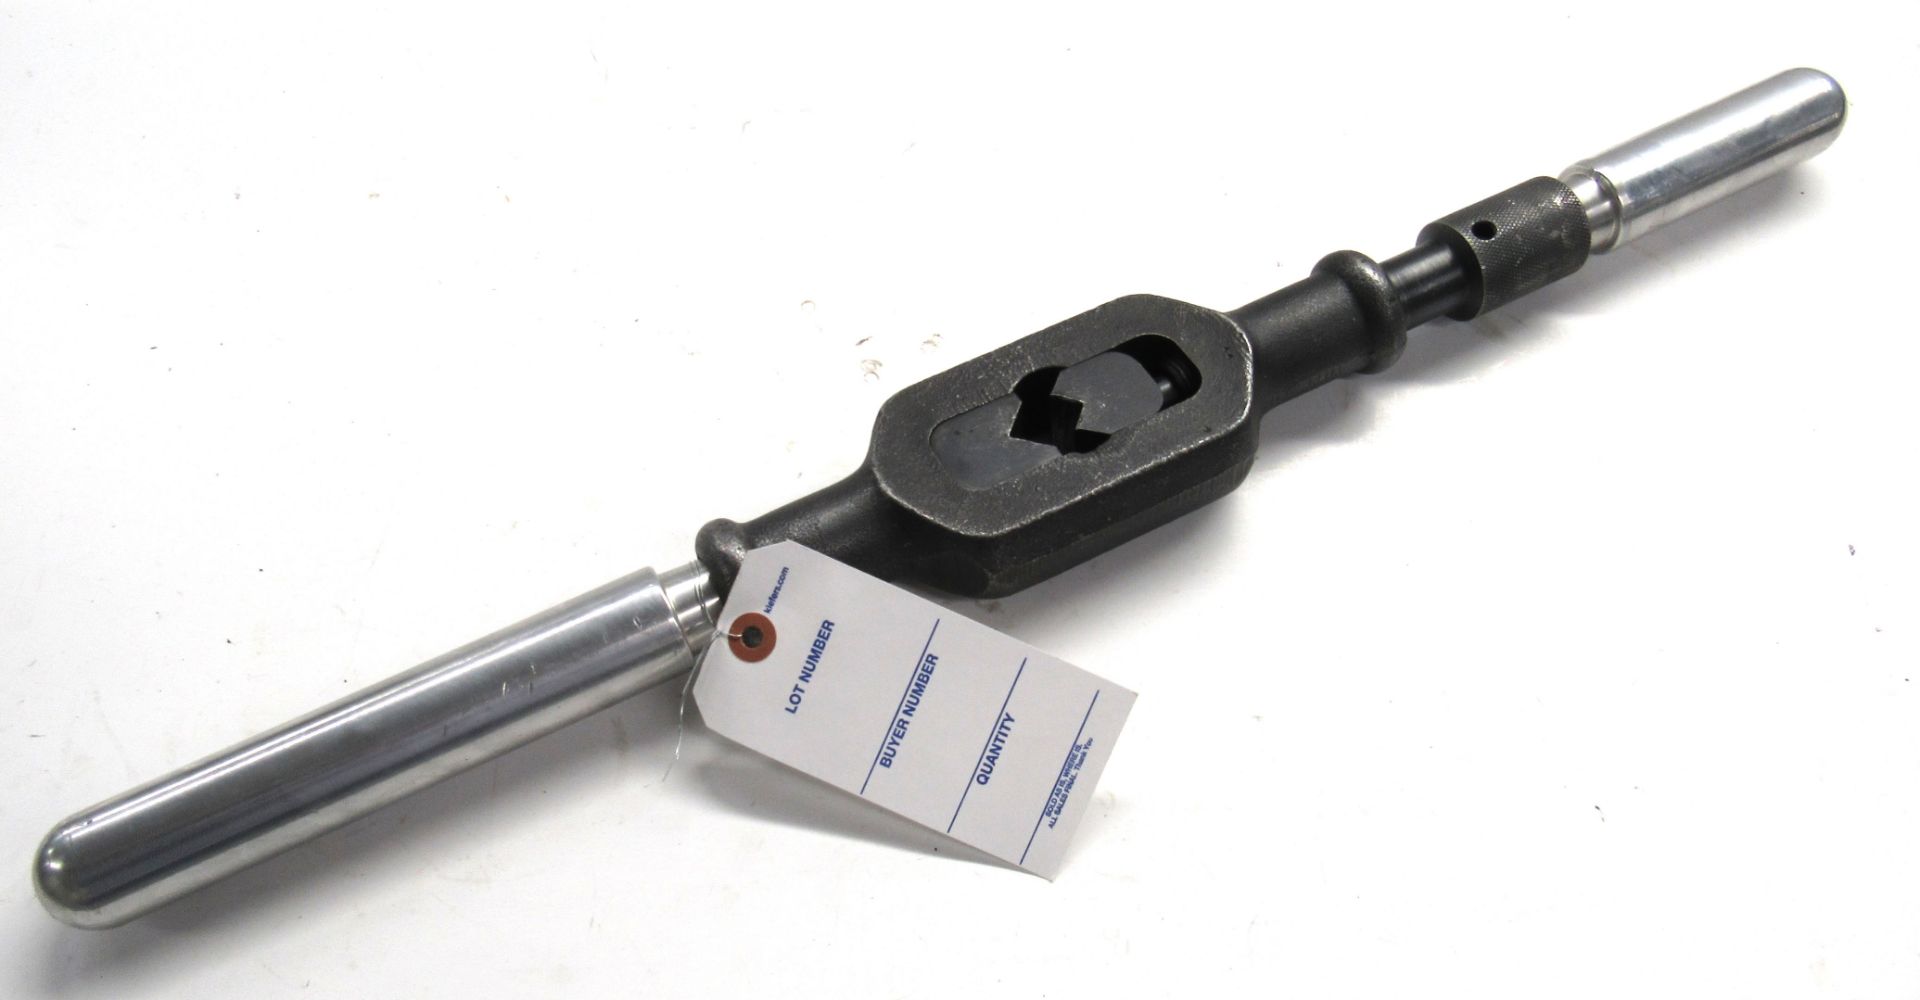 Tapping Wrench